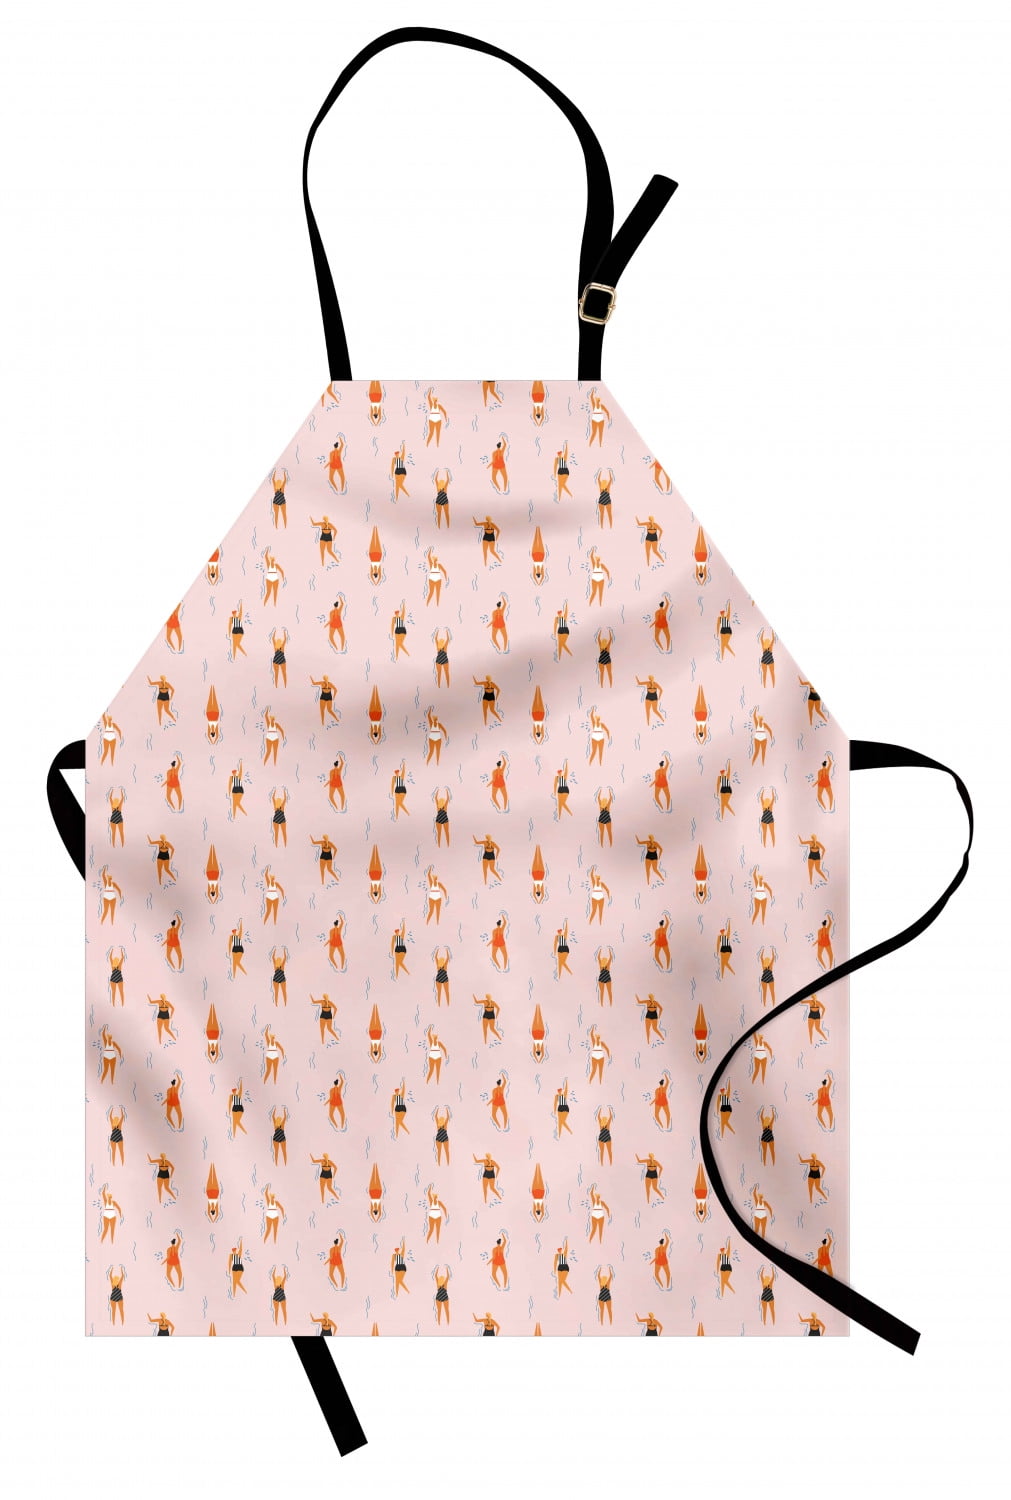 Details about   Apron Bib with Adjustable Neck for Cooking Gardening Ambesonne 